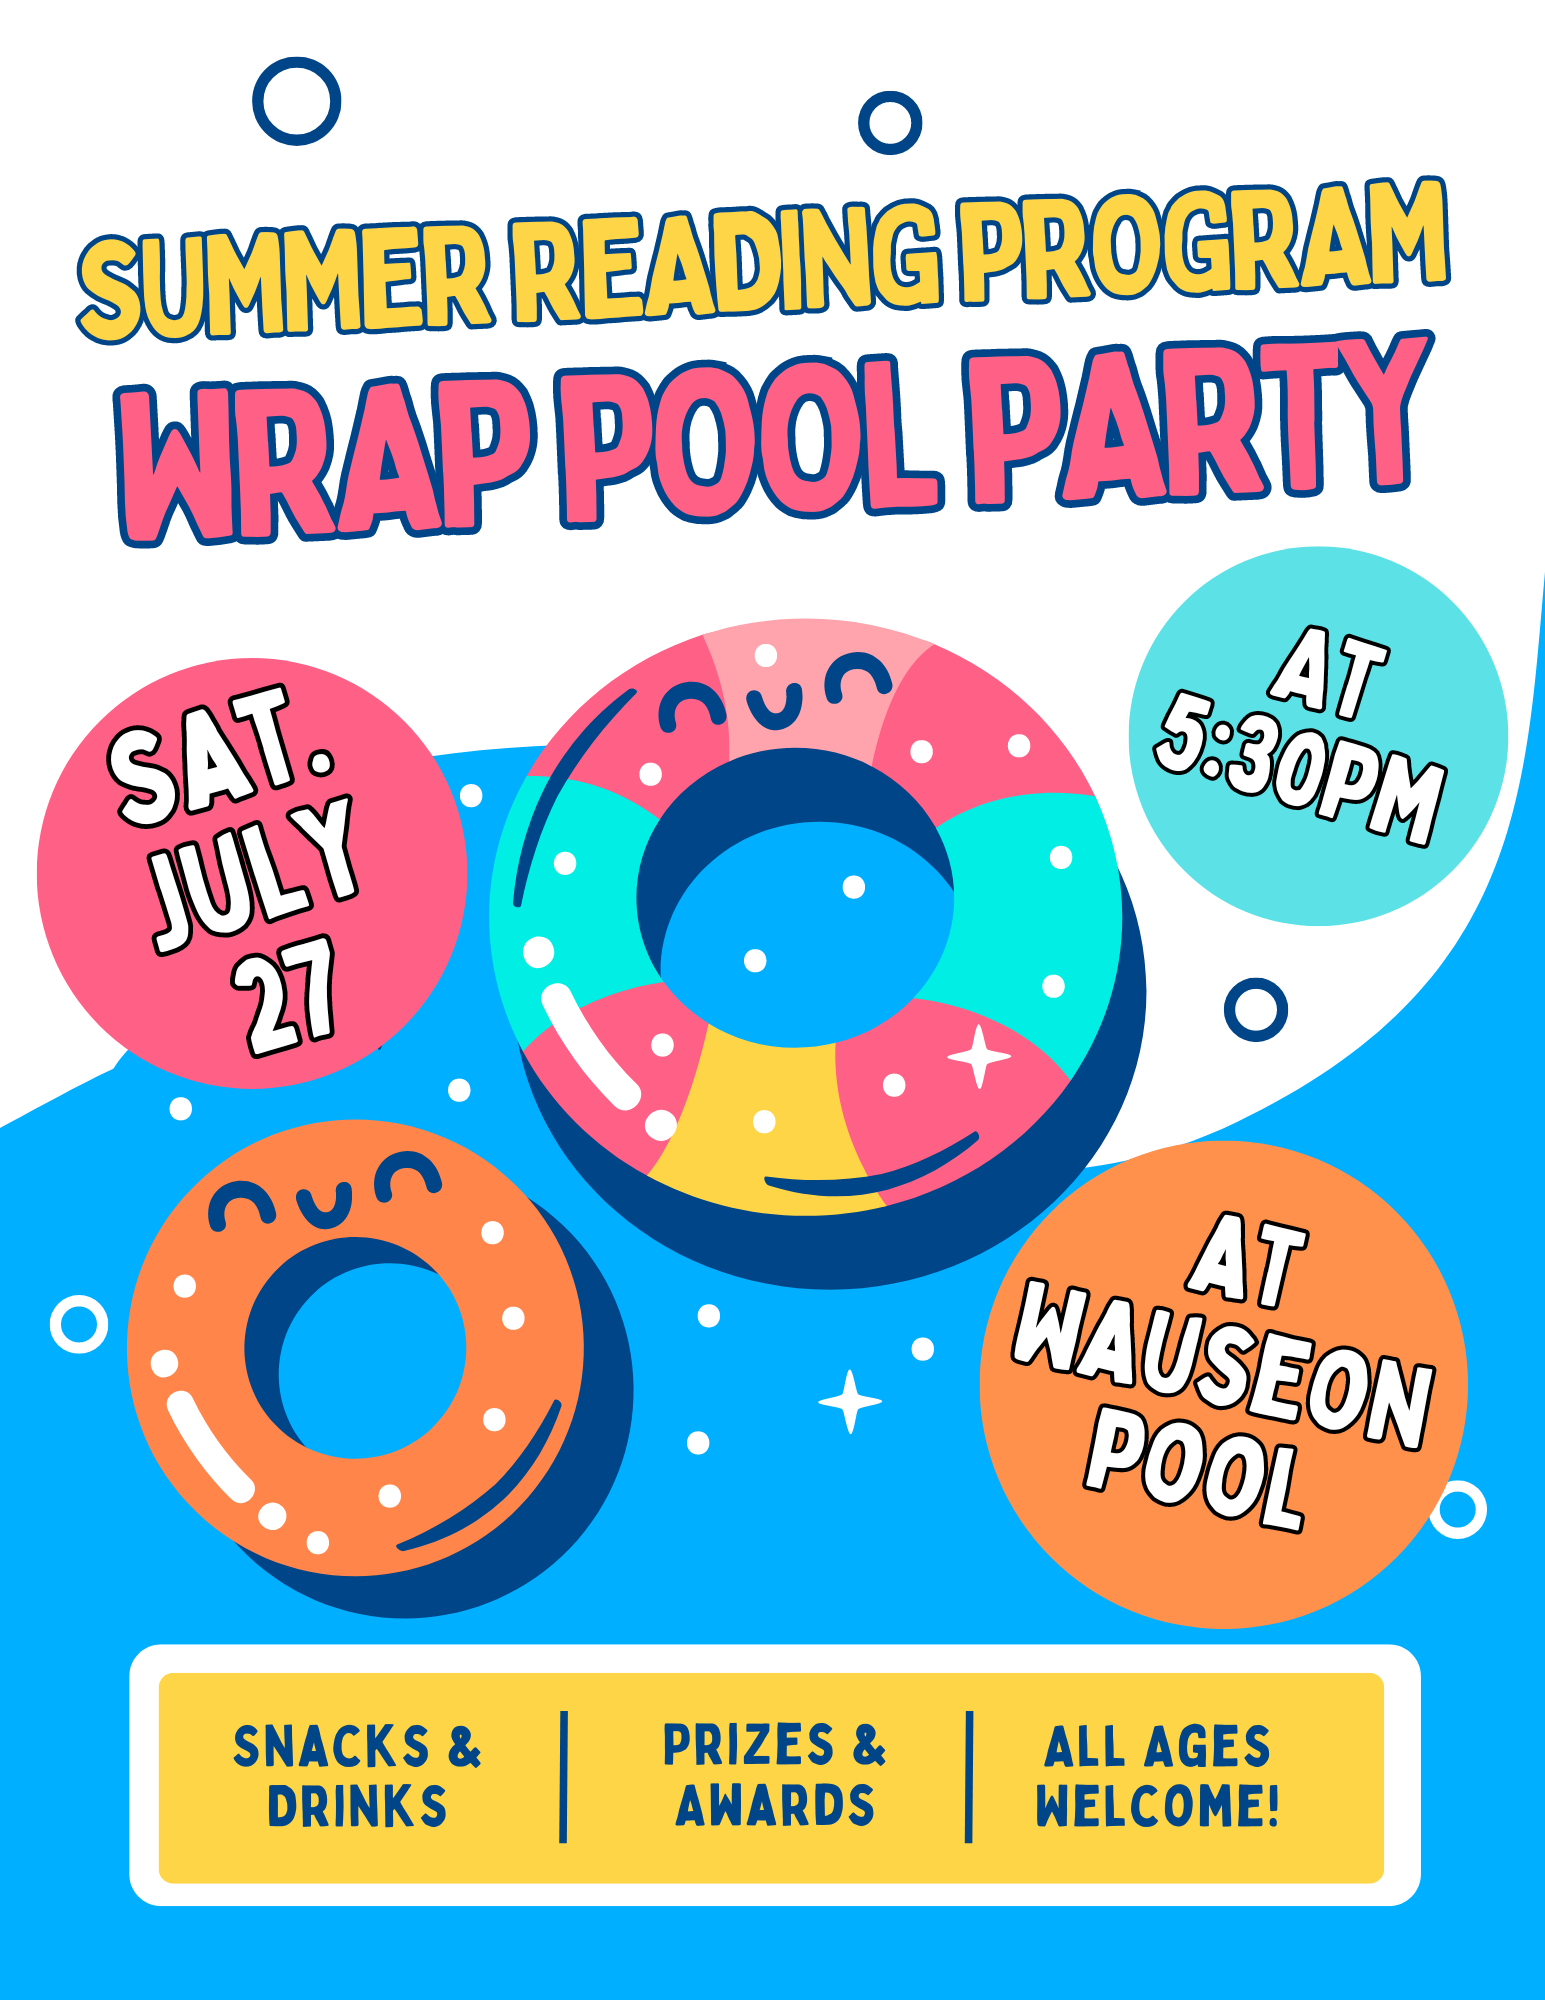 Summer Reading Pool Party flyer